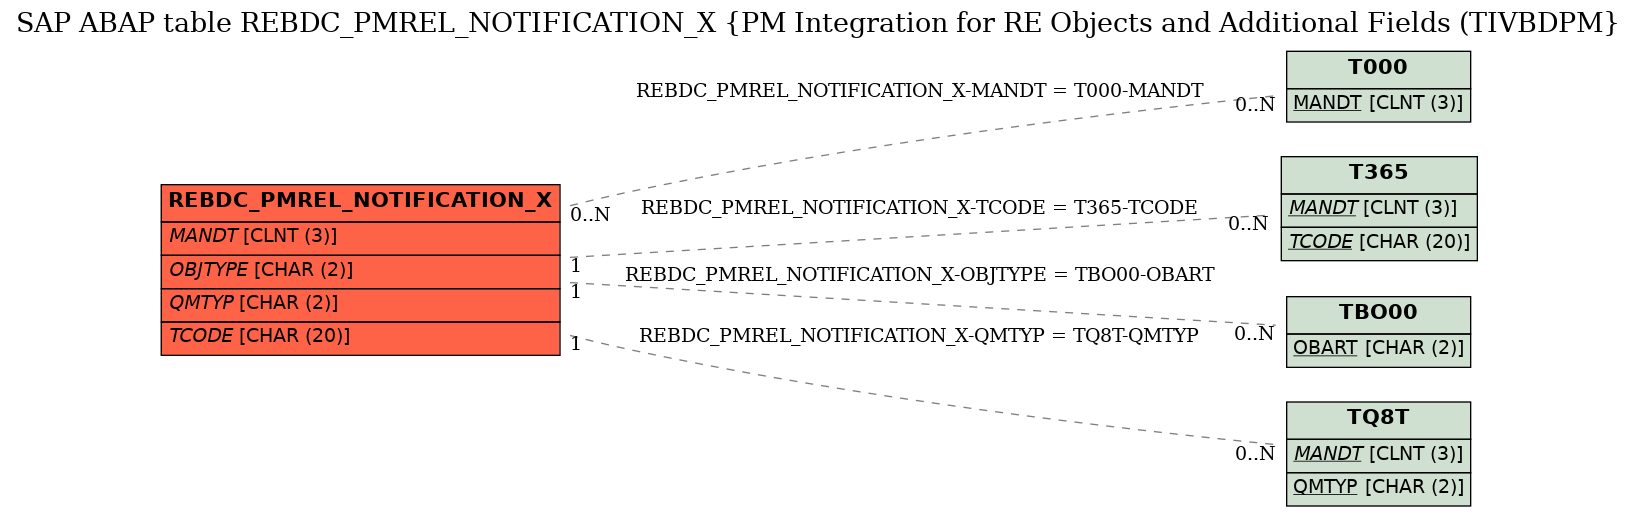 E-R Diagram for table REBDC_PMREL_NOTIFICATION_X (PM Integration for RE Objects and Additional Fields (TIVBDPM)